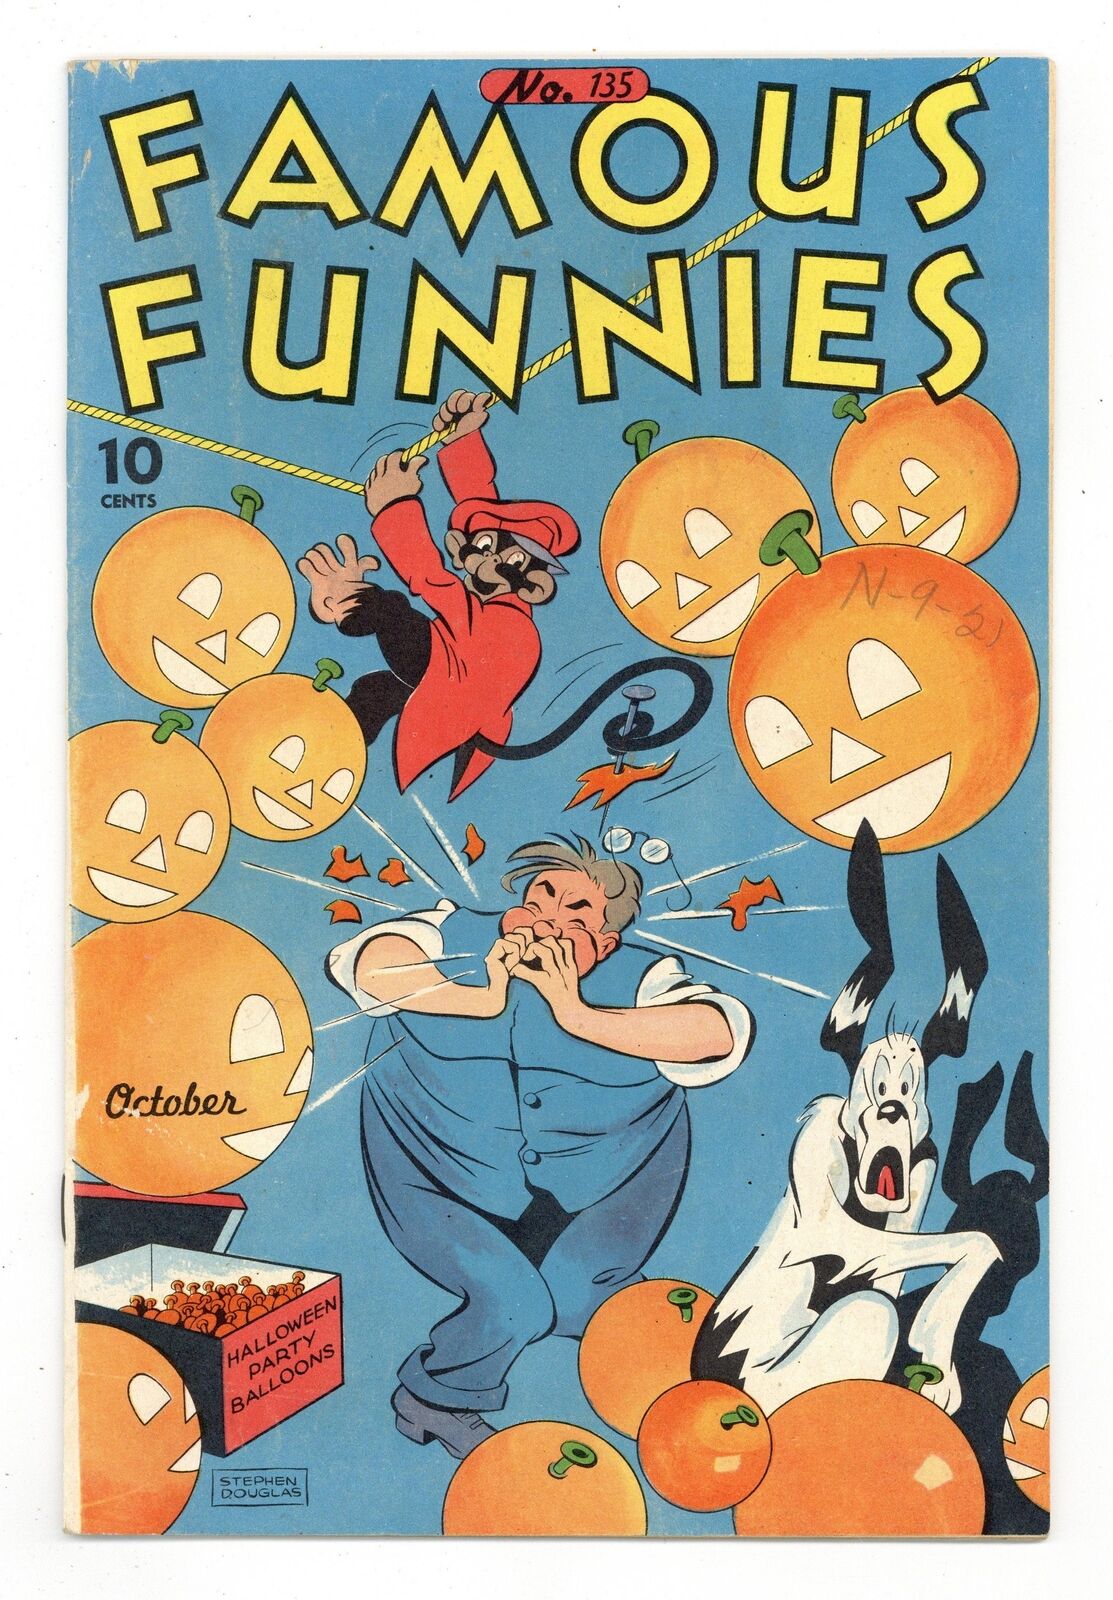 Famous Funnies #135 VG/FN 5.0 1945